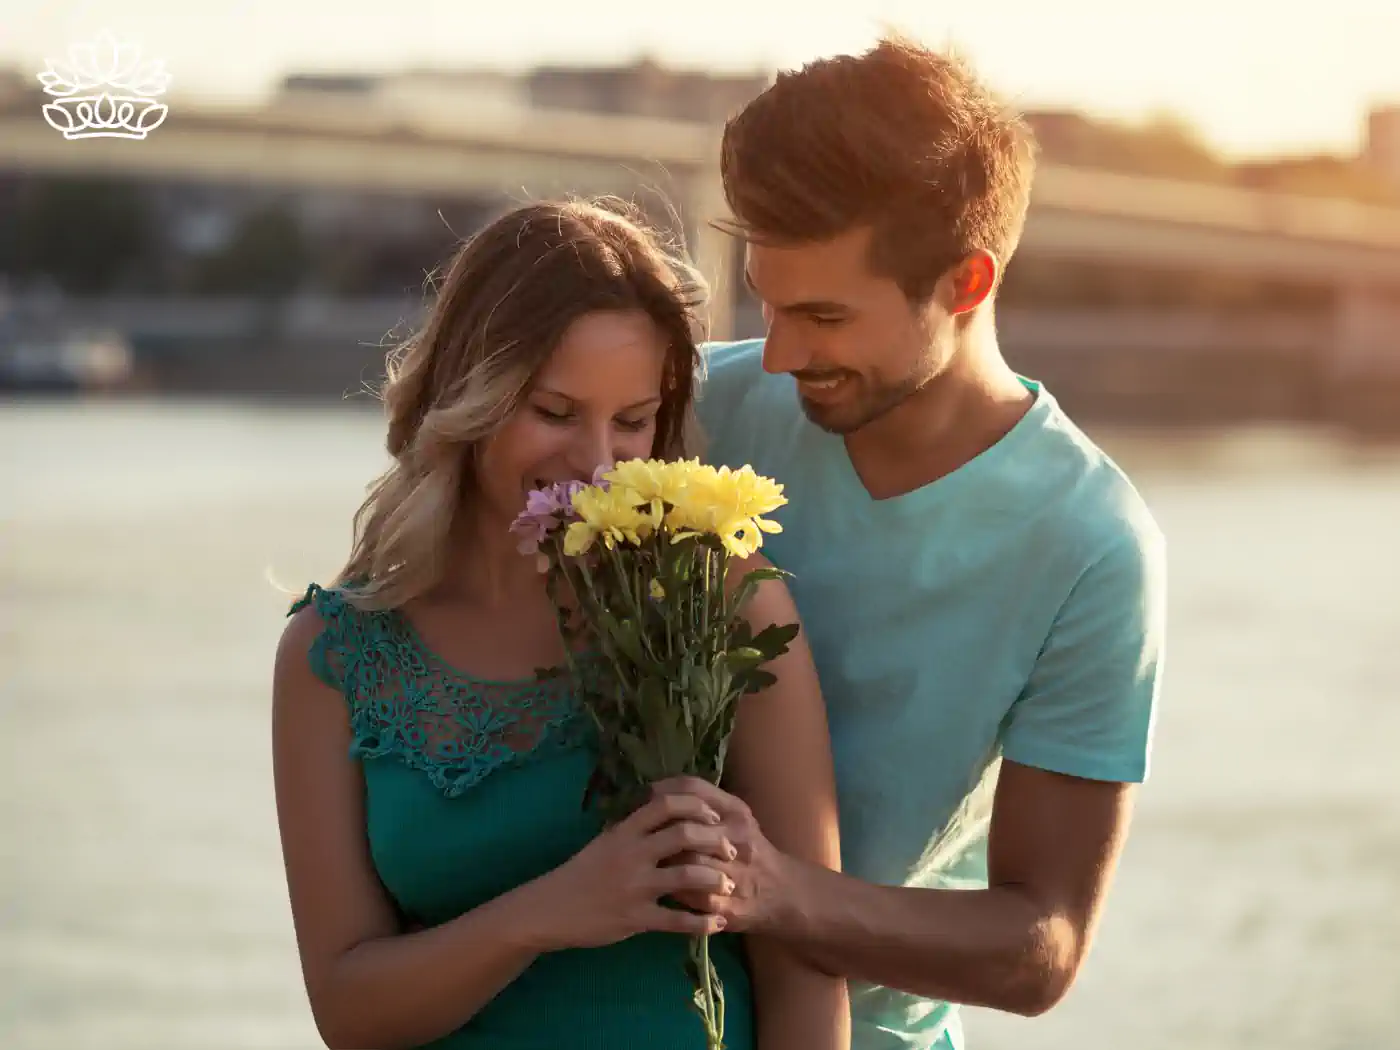 Romantic scene with a young man presenting a bouquet of yellow and purple flowers to a delighted woman during a sunset riverside walk. Fabulous Flowers and Gifts - Thank You Flowers. Delivered with Heart.